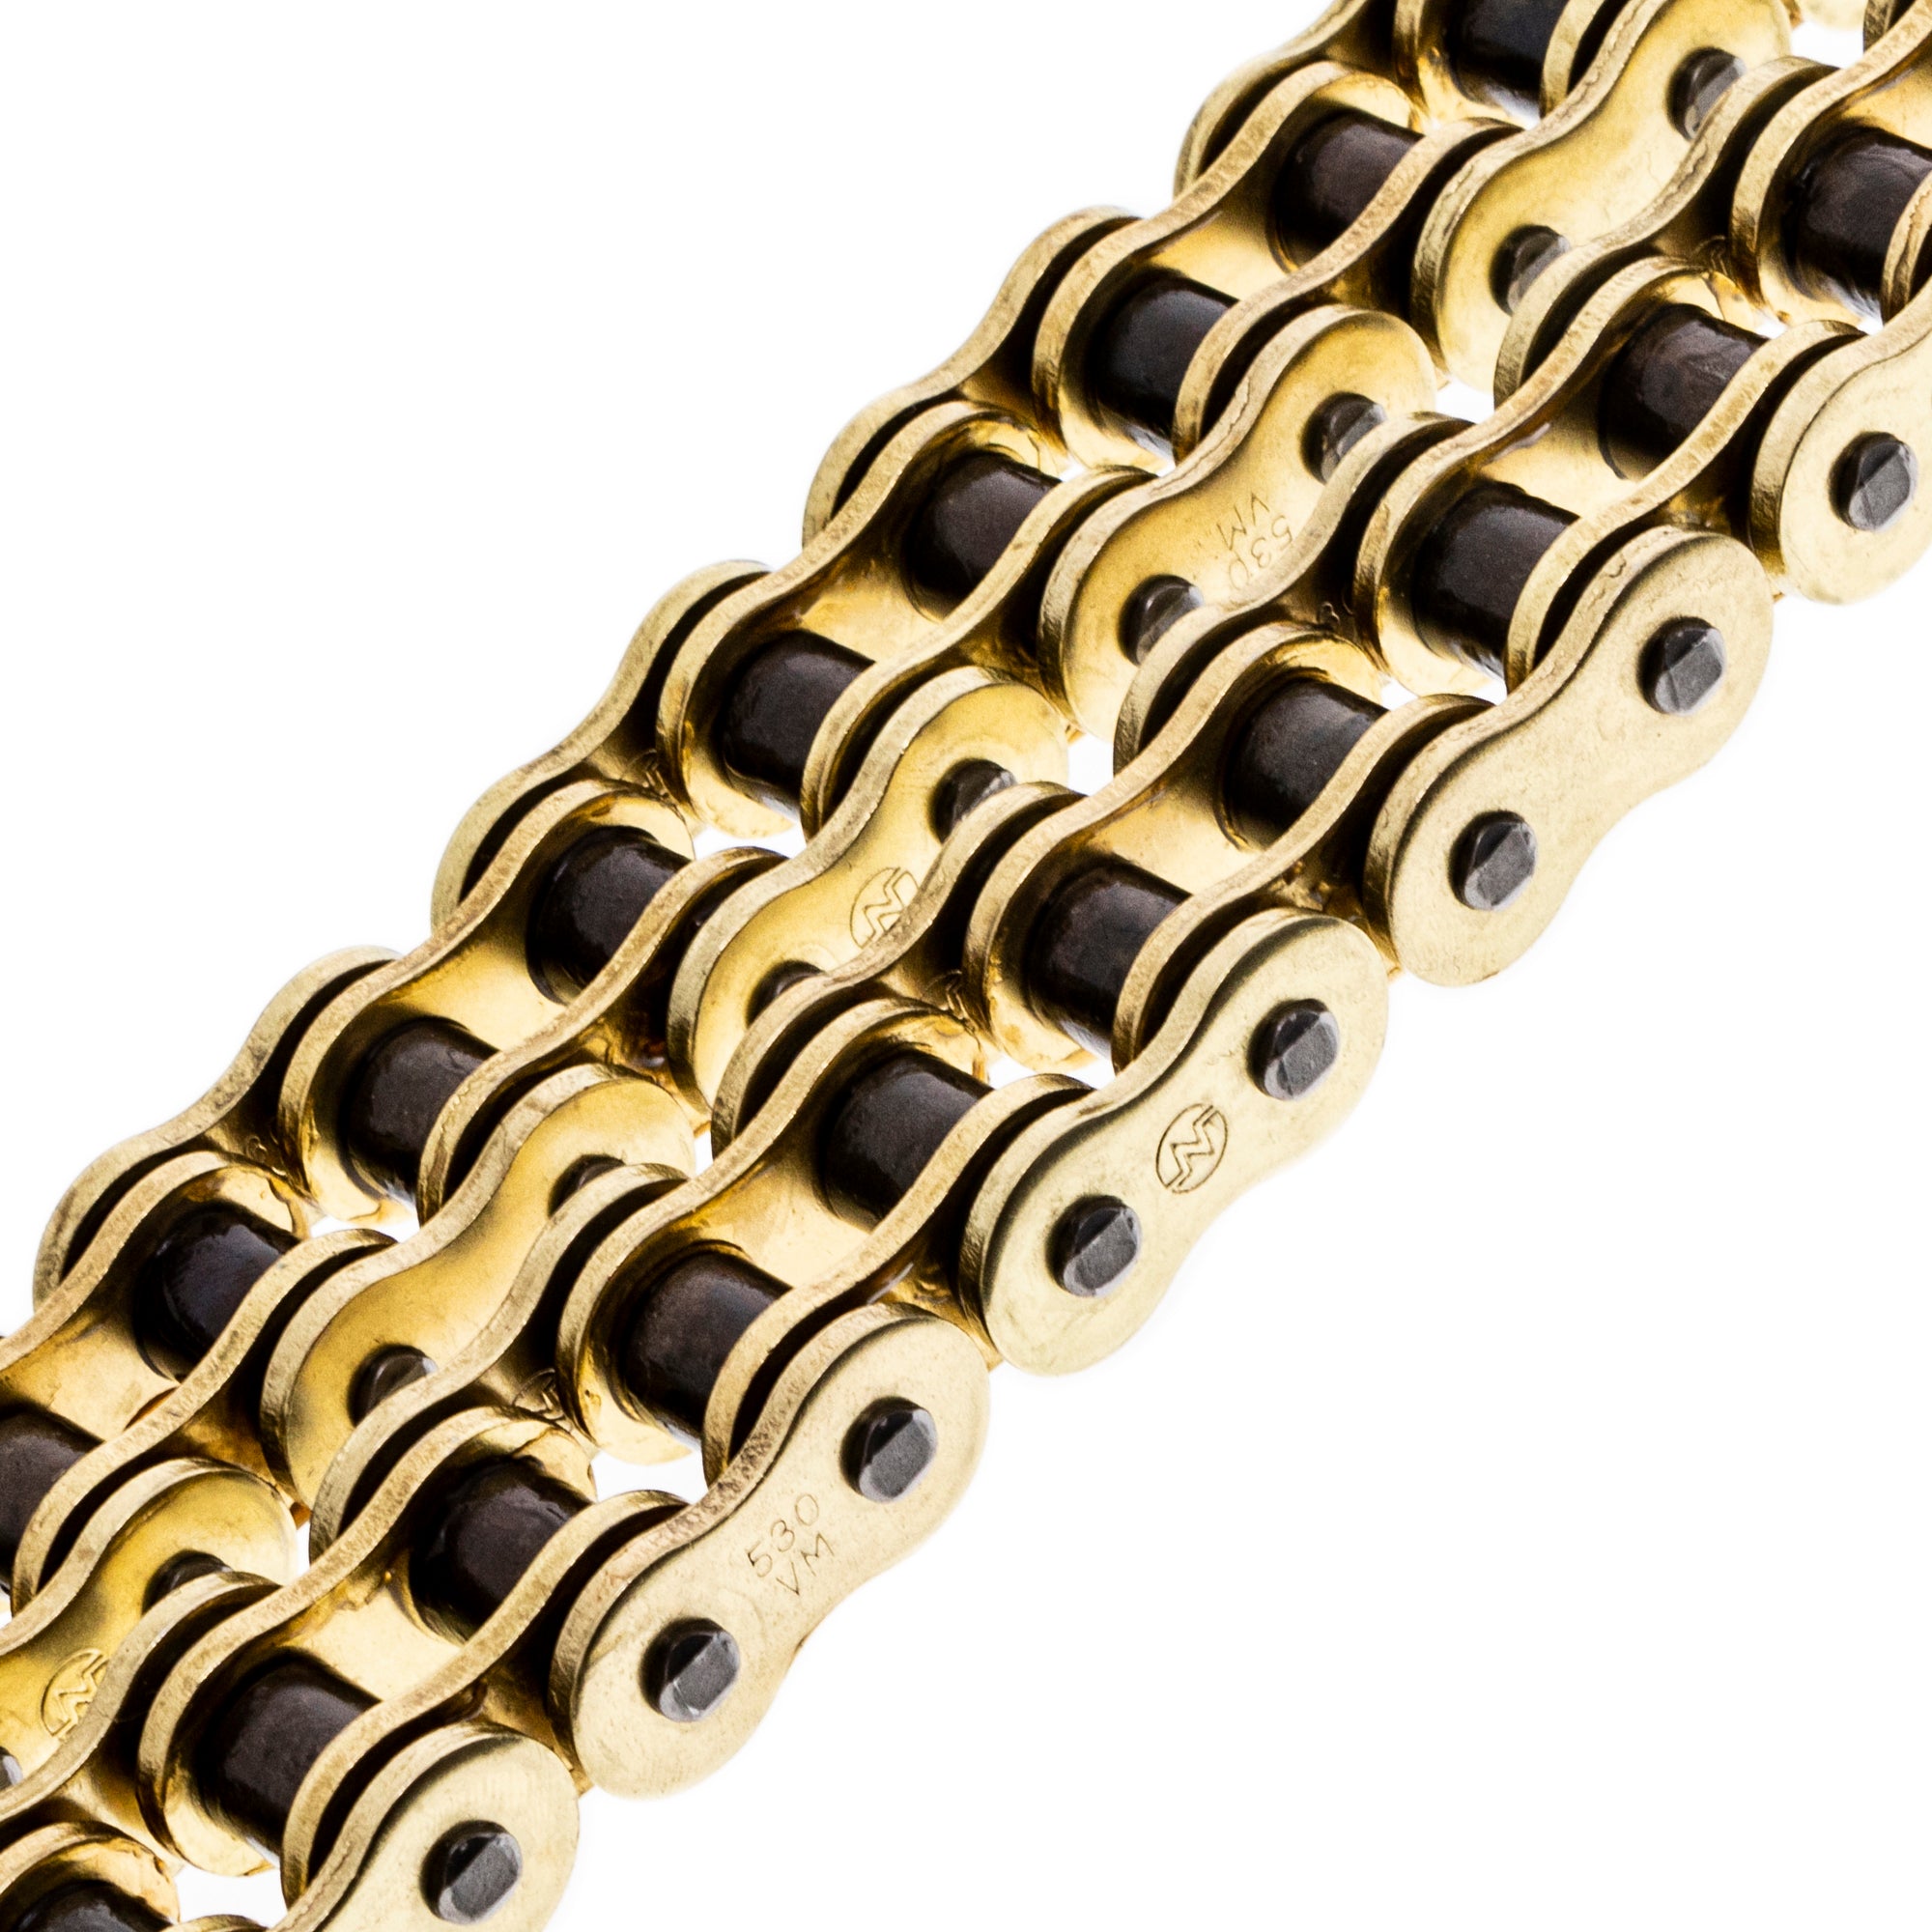 Gold 530 X-Ring Chain 122 Links With Connecting Master Link Motorcycle